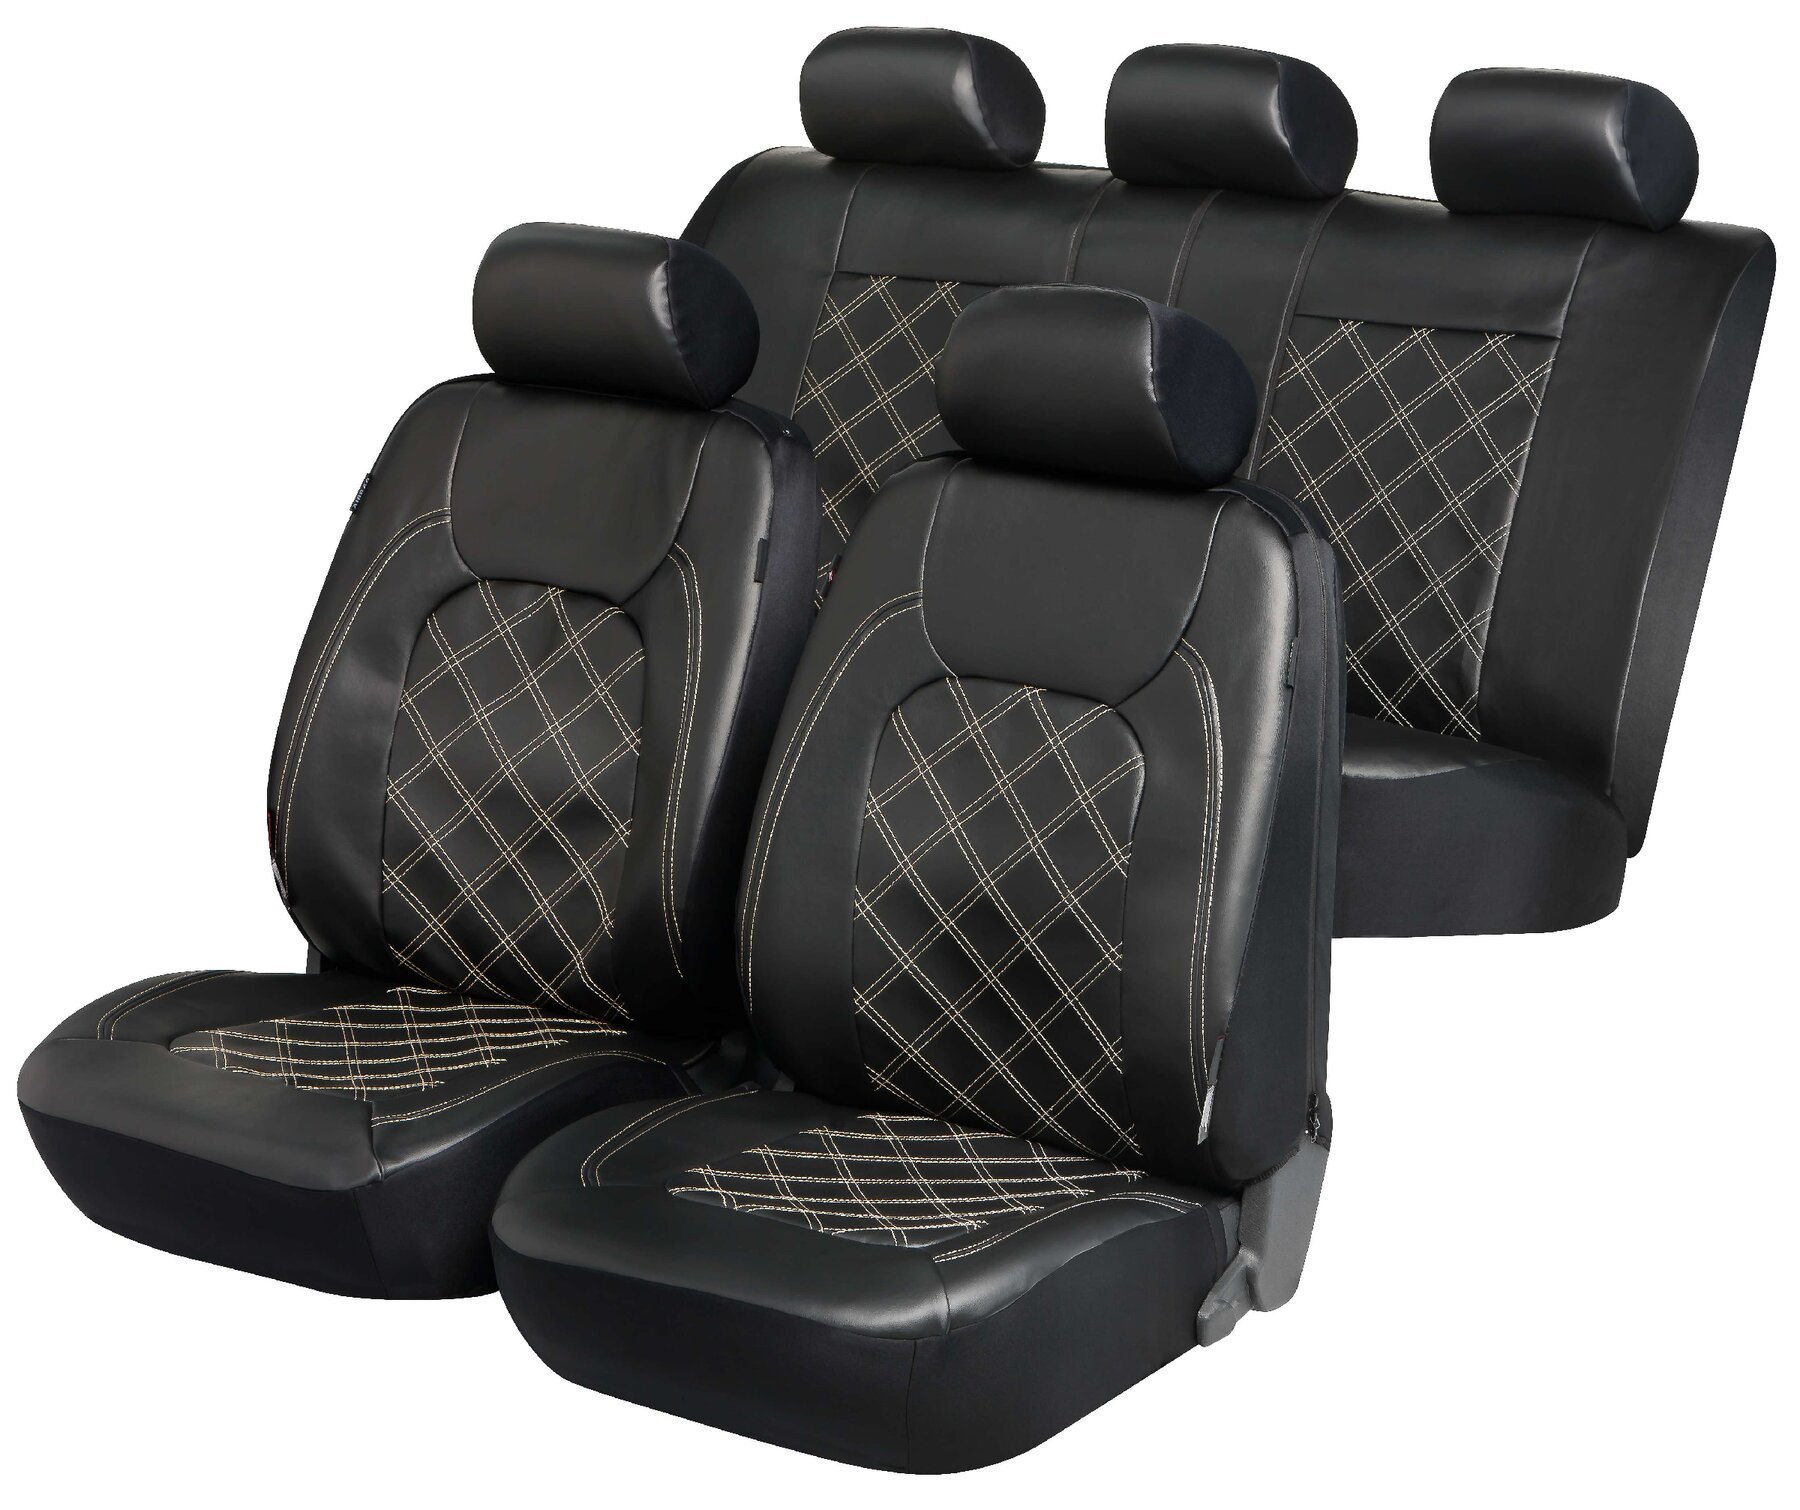 ZIPP IT Deluxe Paddington car Seat covers in imitation leather with zipper system